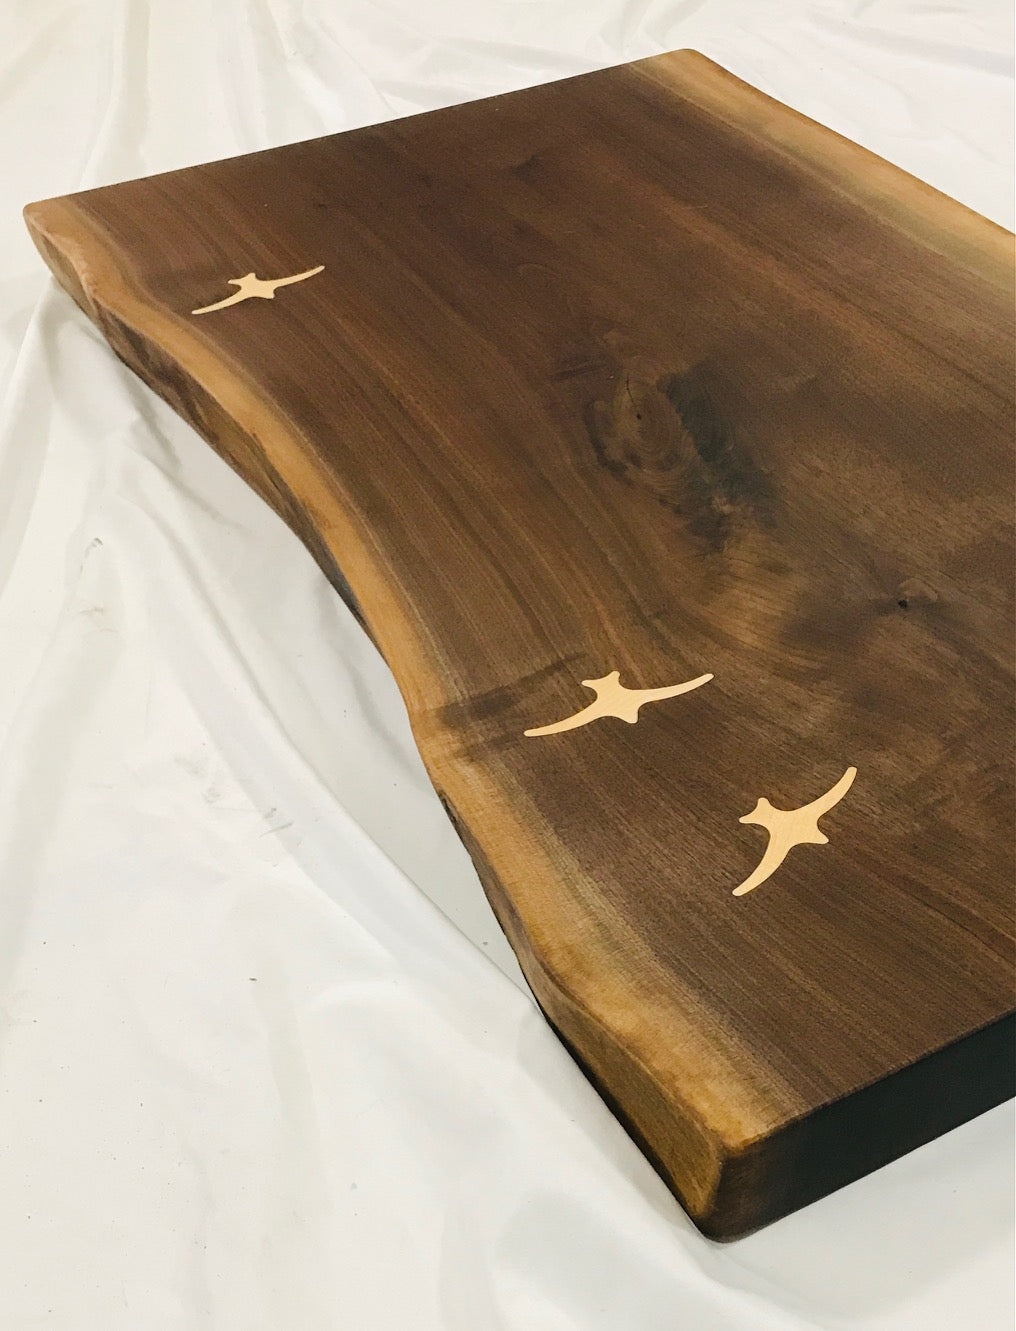 Live edge walnut coffee table with maple seabird inlay - partial 45degree view